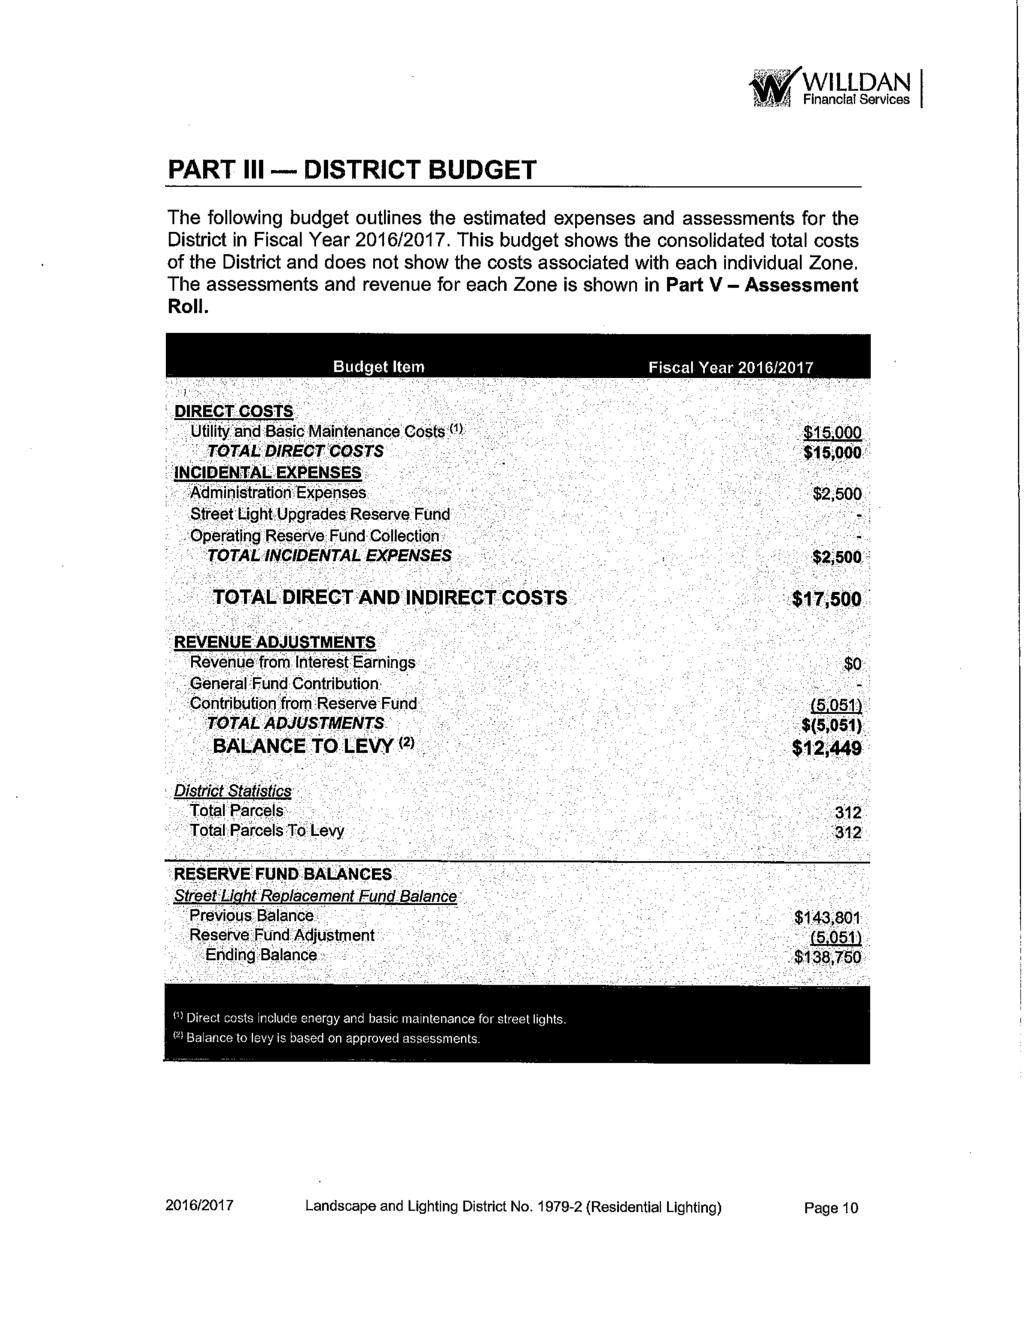 ik^willdan Financial Services PART DISTRICT BUDGET The following budget outlines the estimated expenses and assessments for the District in Fiscal Year 2016/2017.